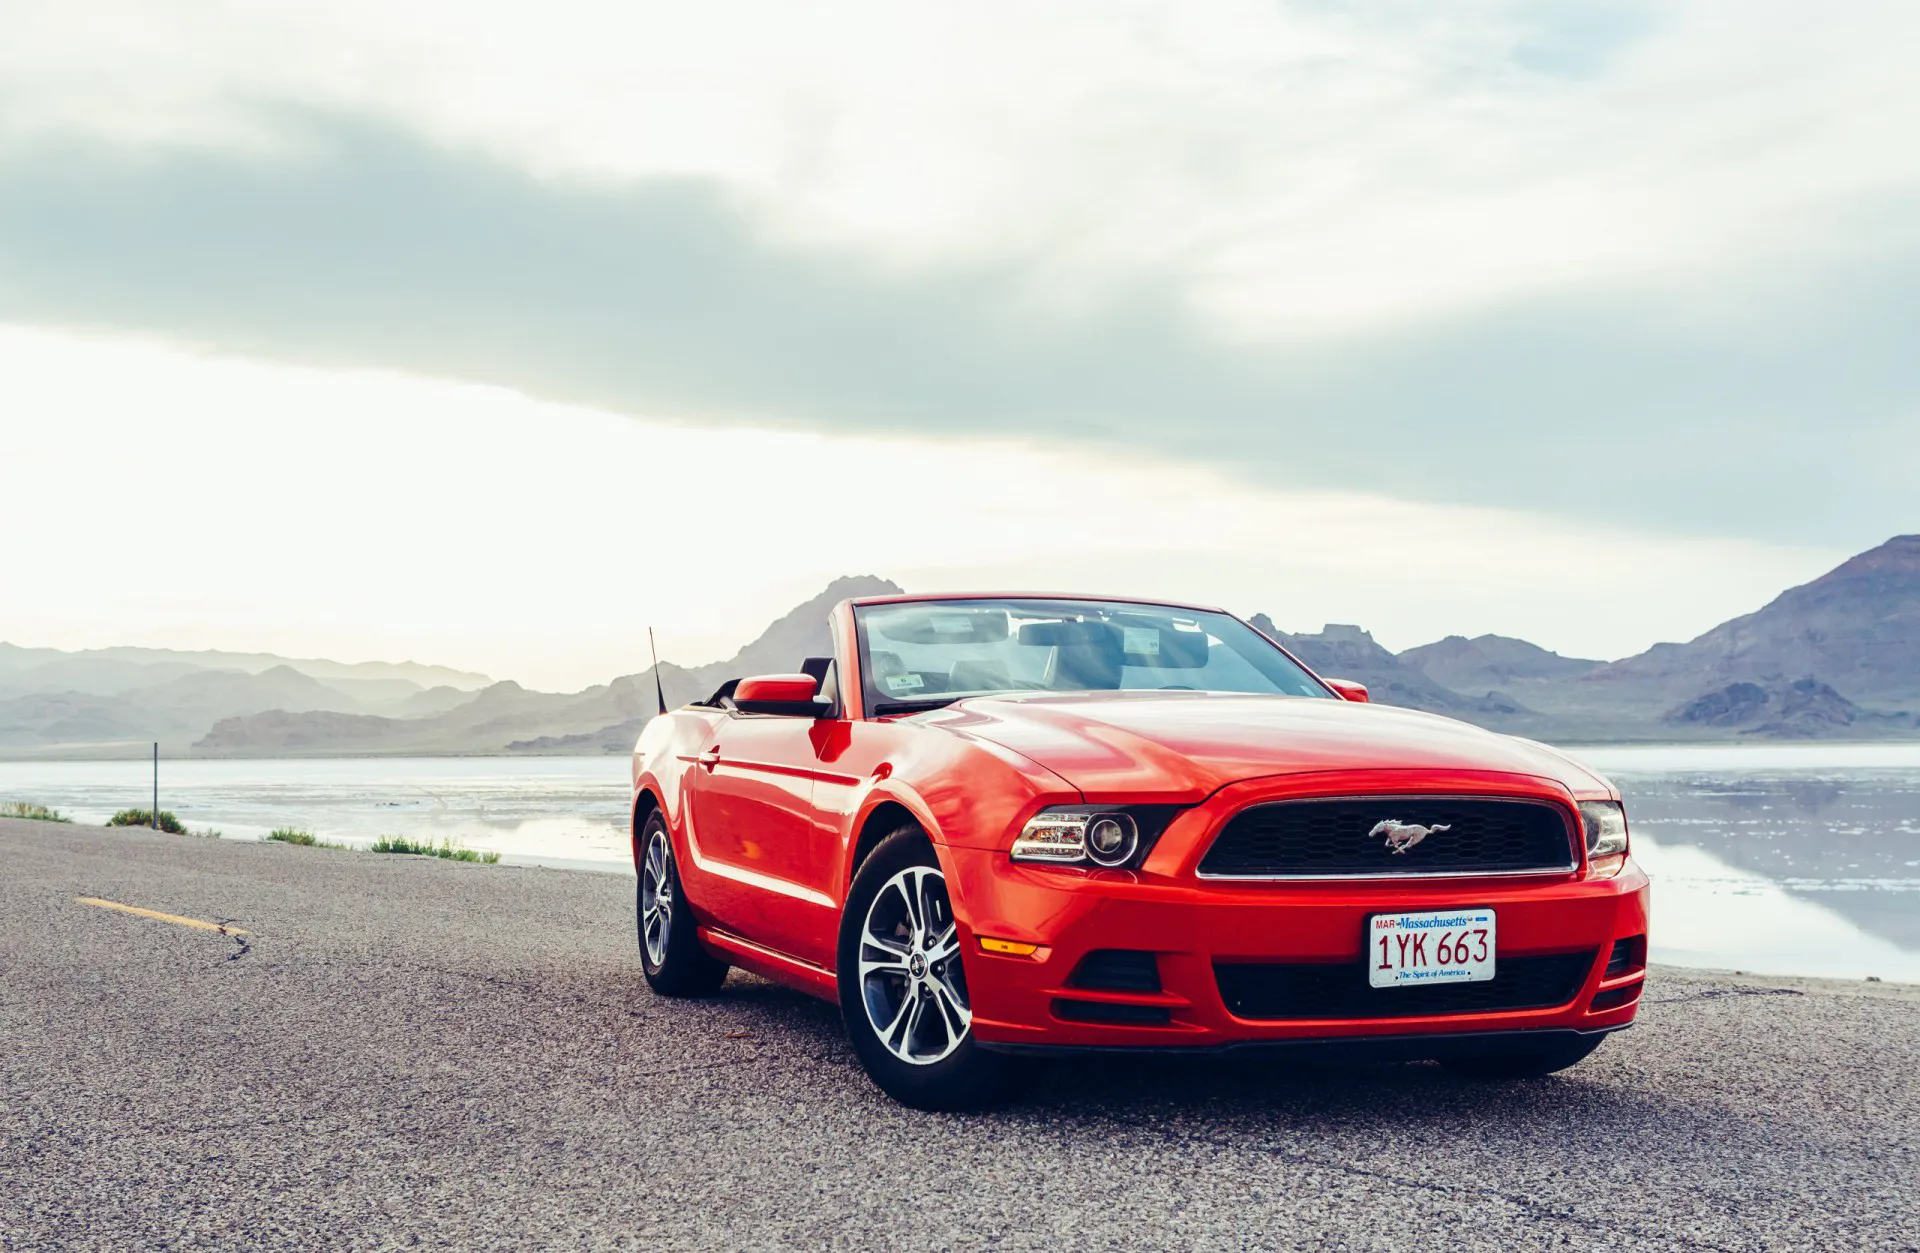 2012 Ford Mustang parked near the shore